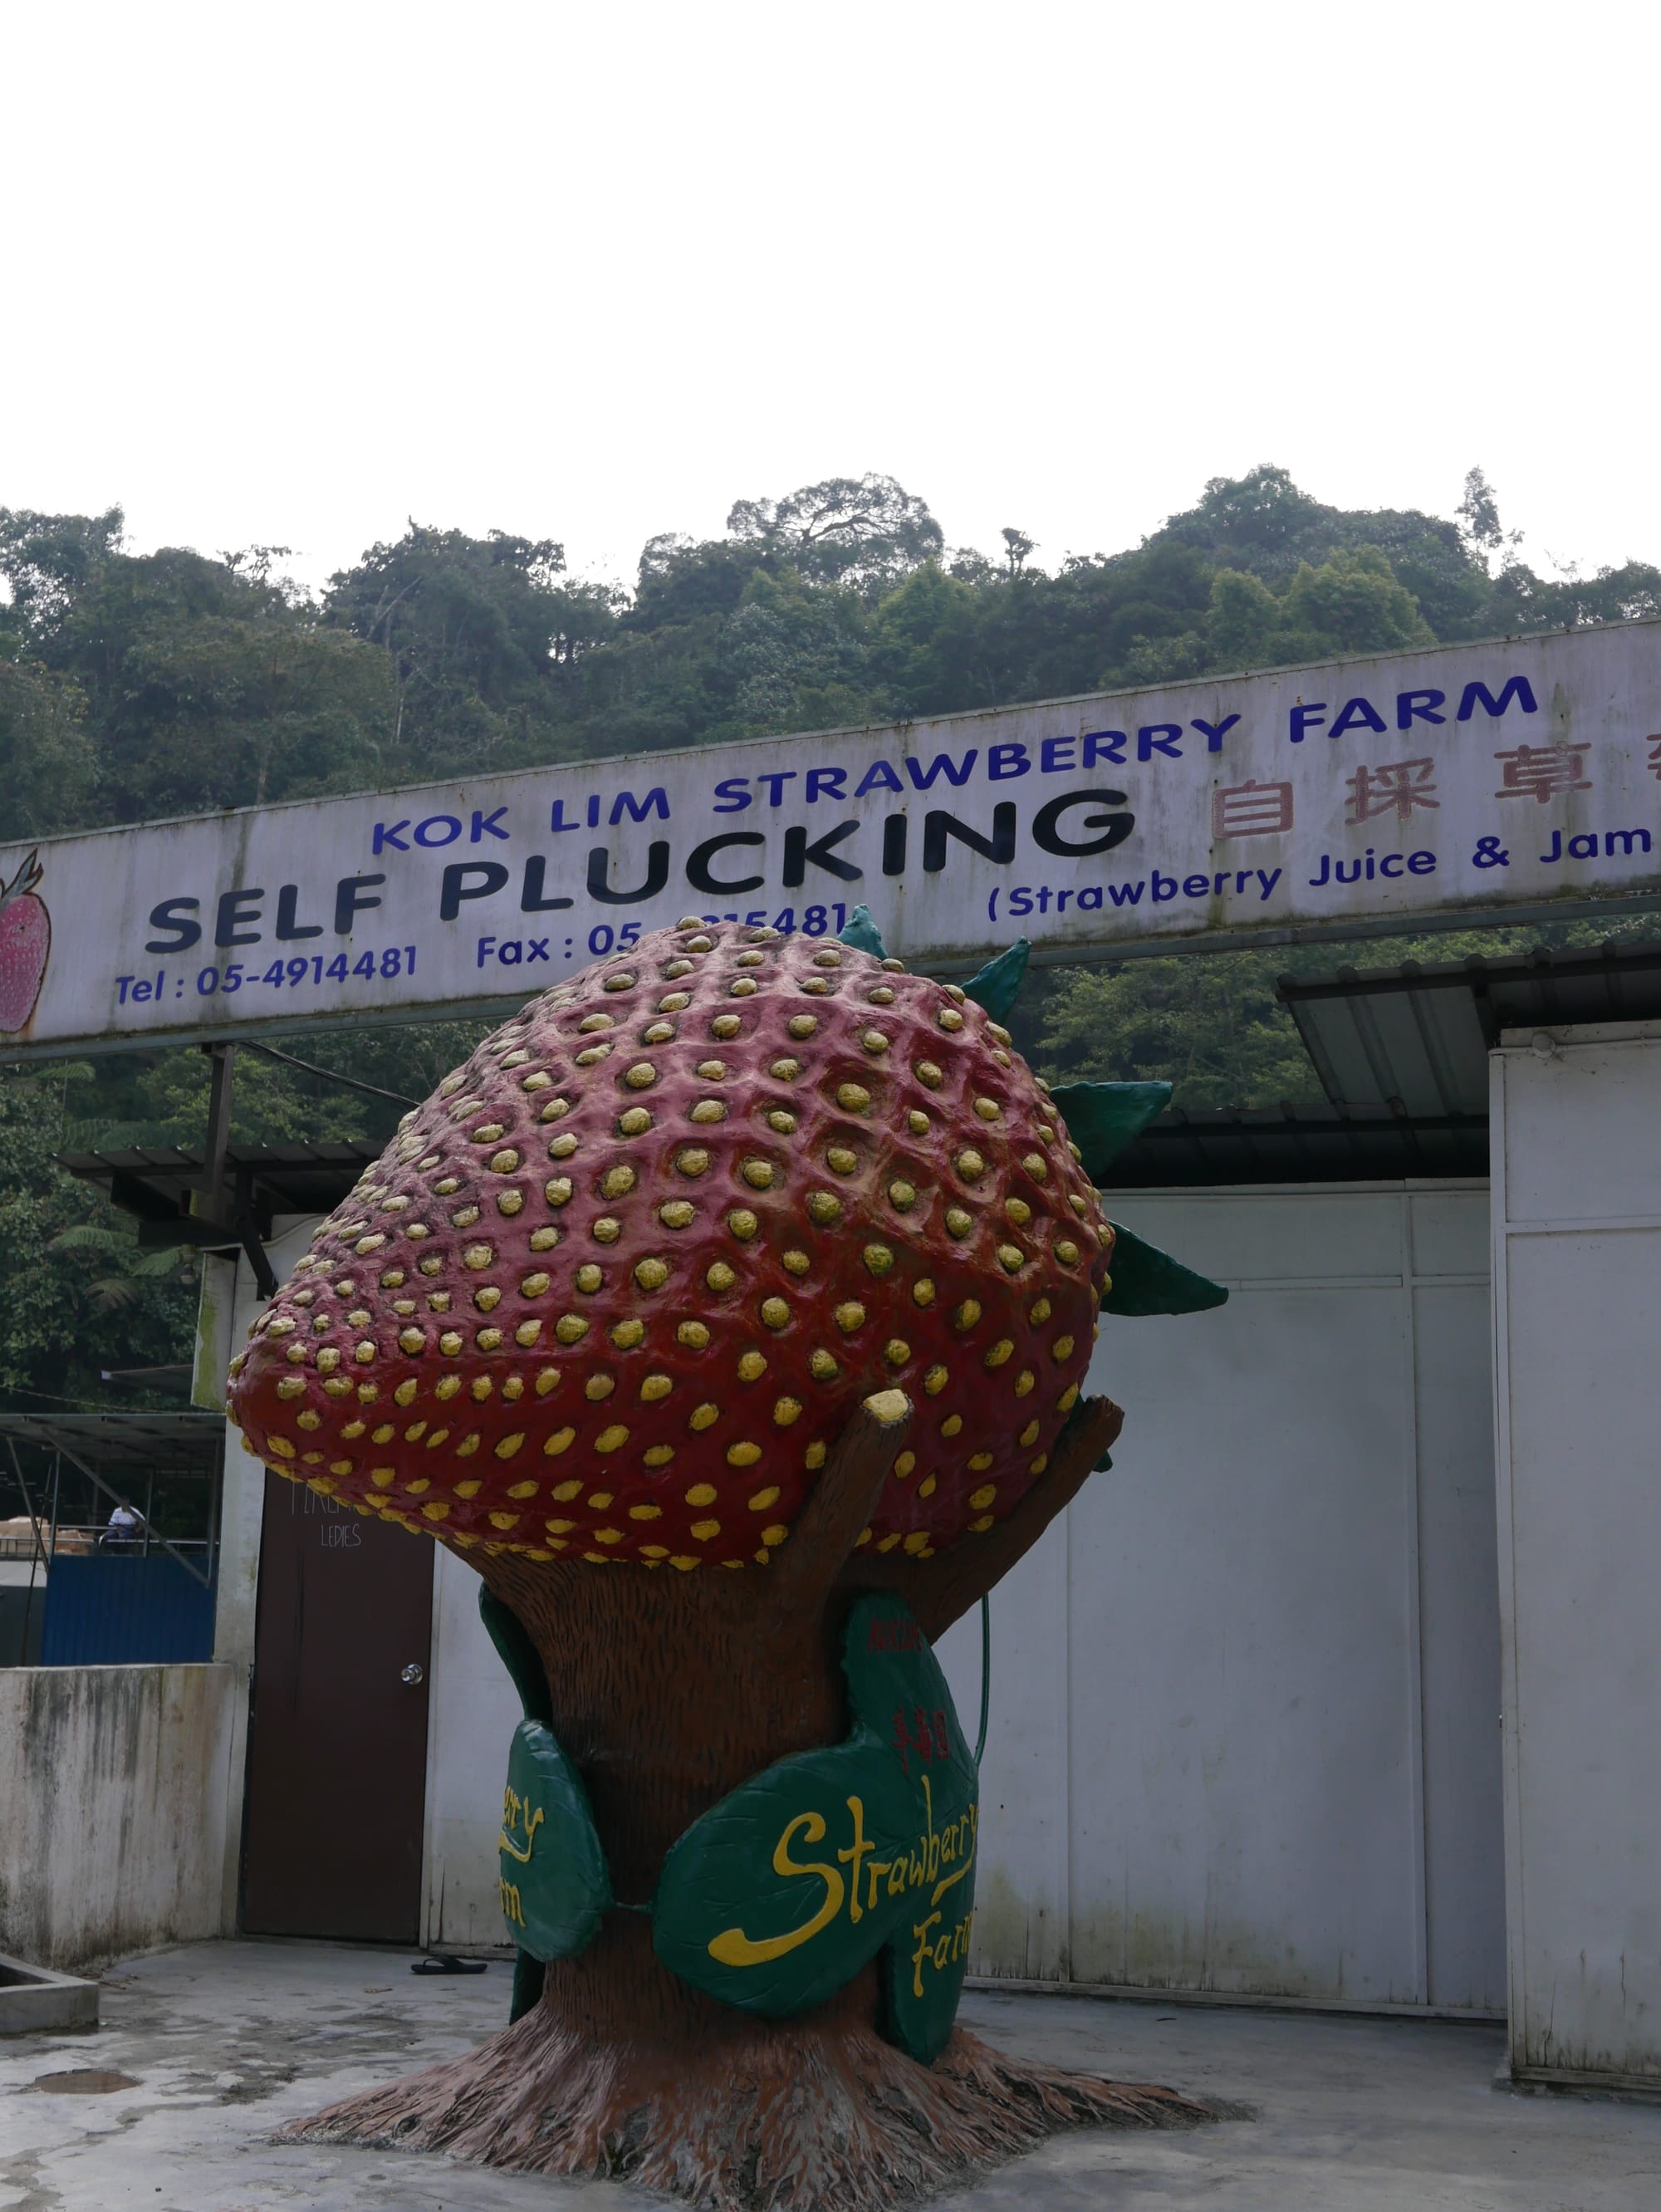 Photo by Author — self-plucking strawberries — Cameron Highlands, Malaysia